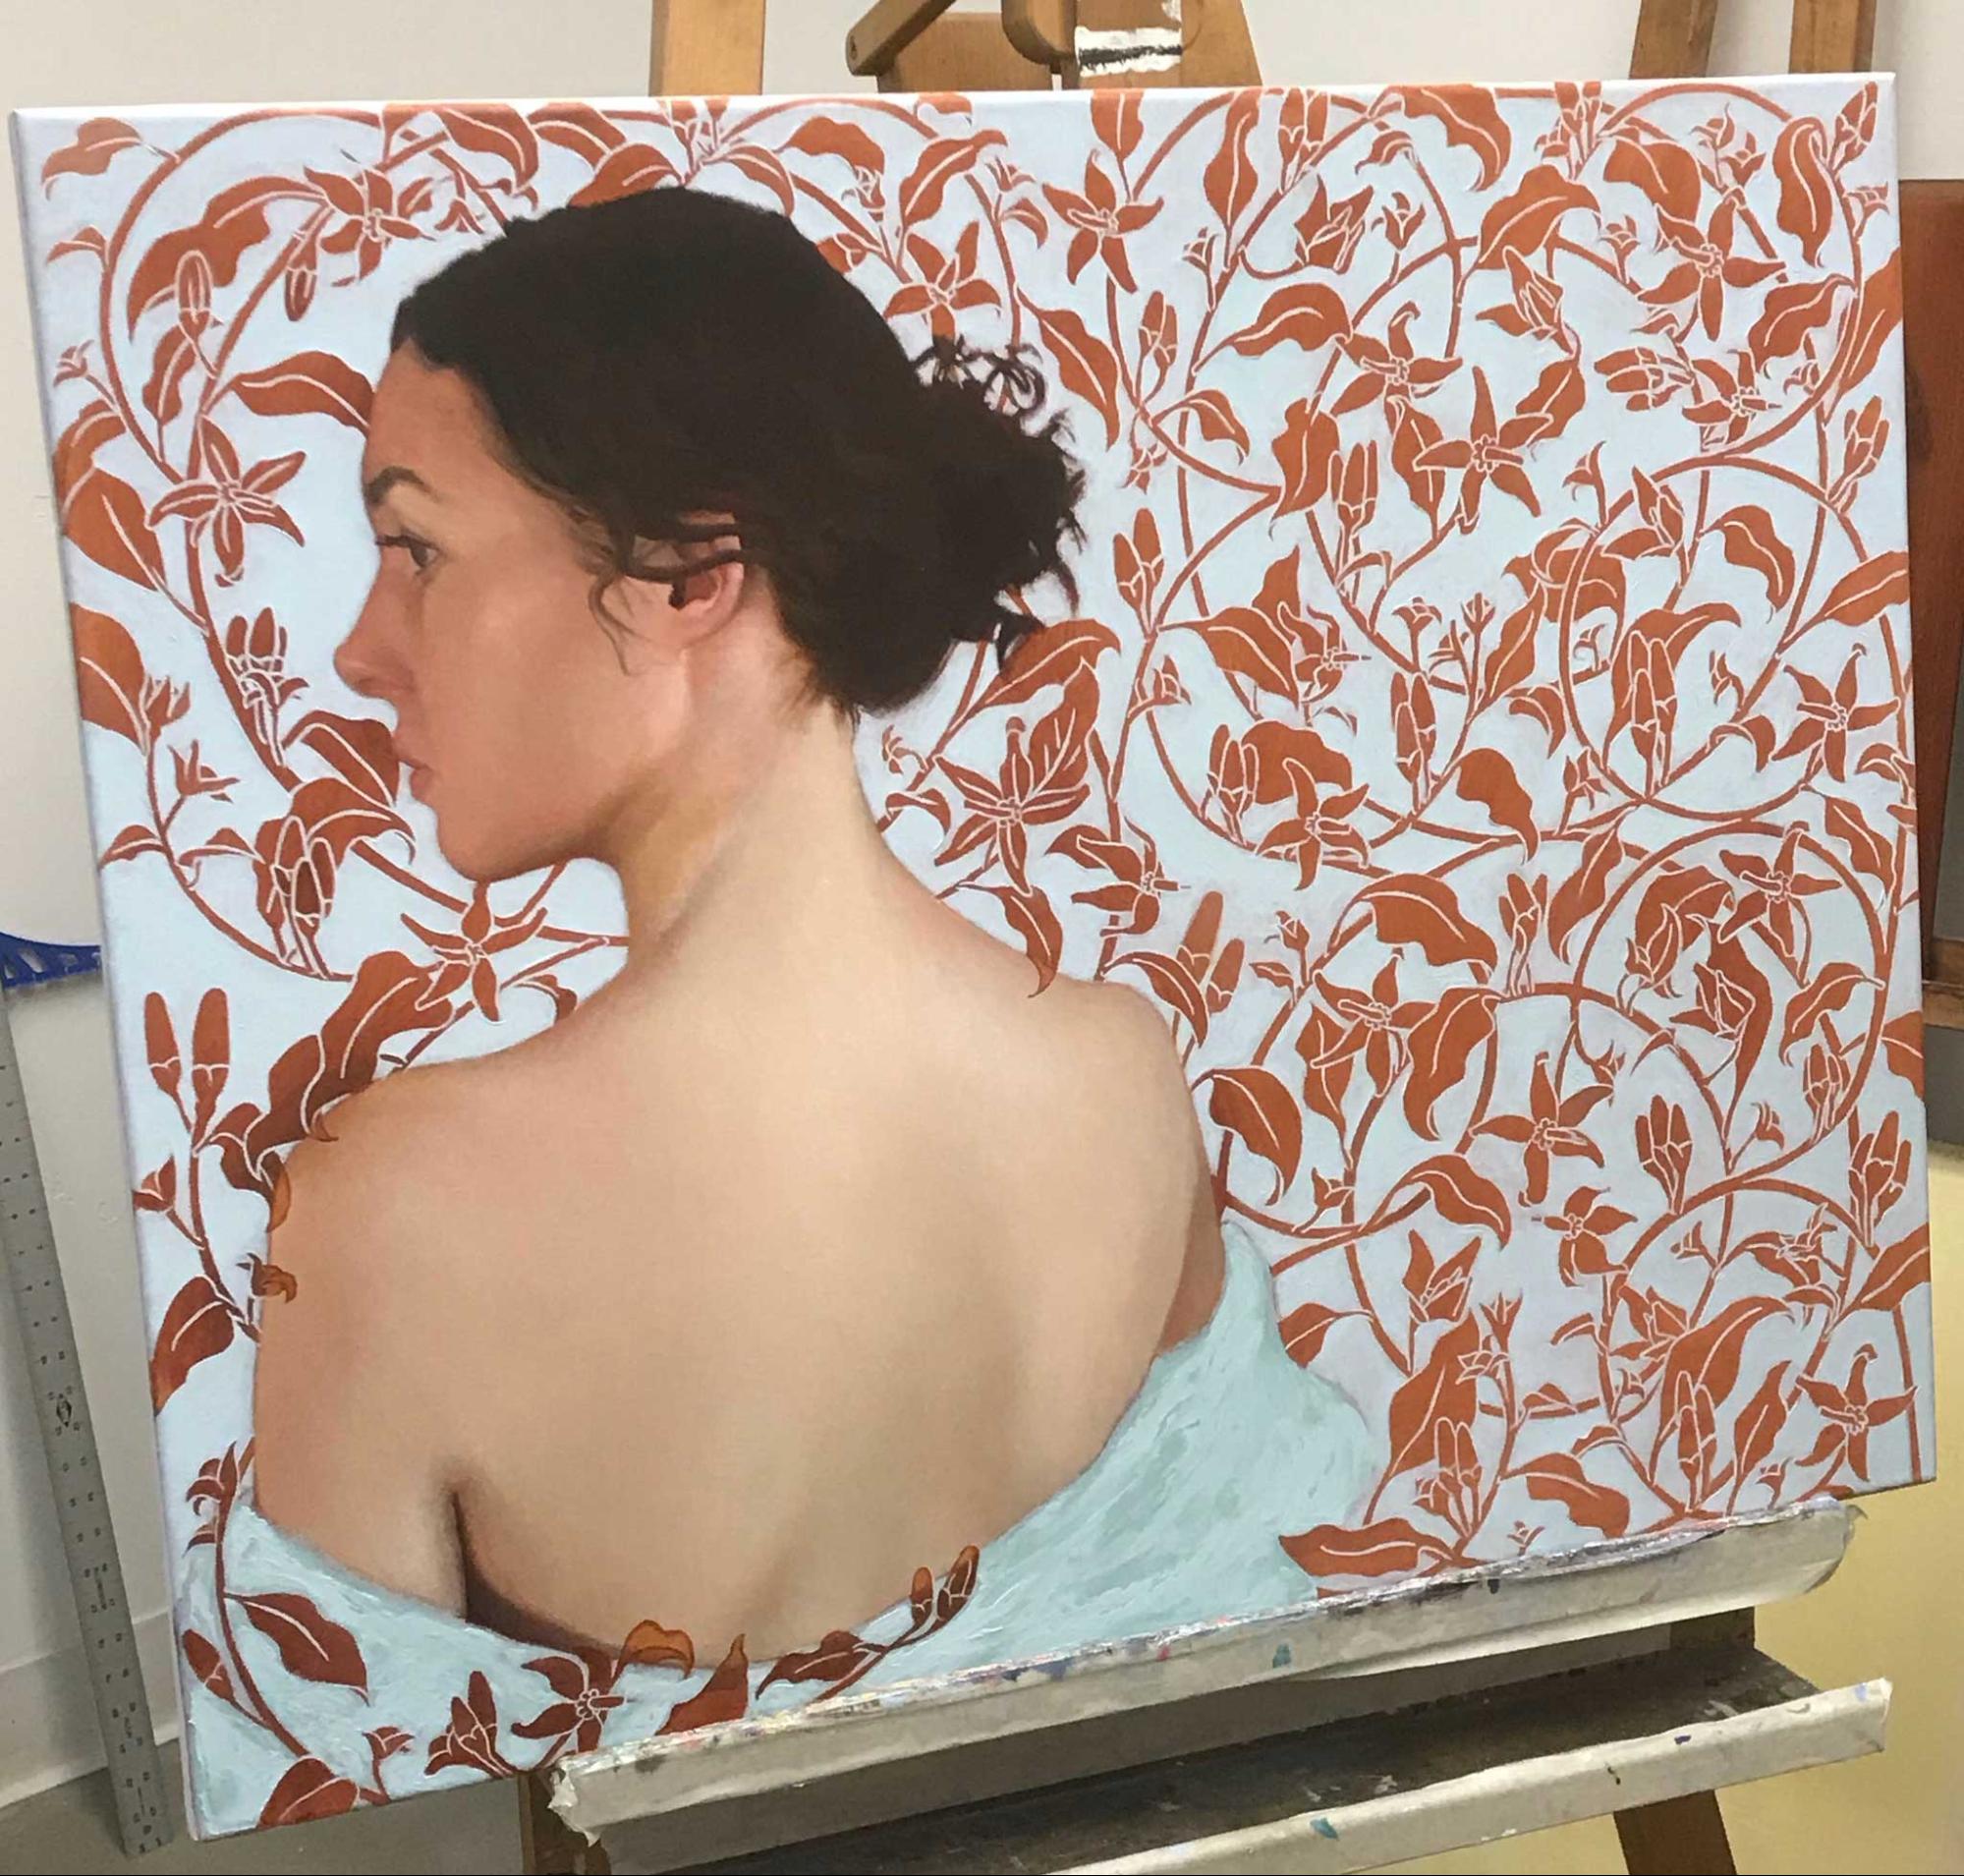 Oil painting step-by-step - Aixa Oliveras - RealismToday.com